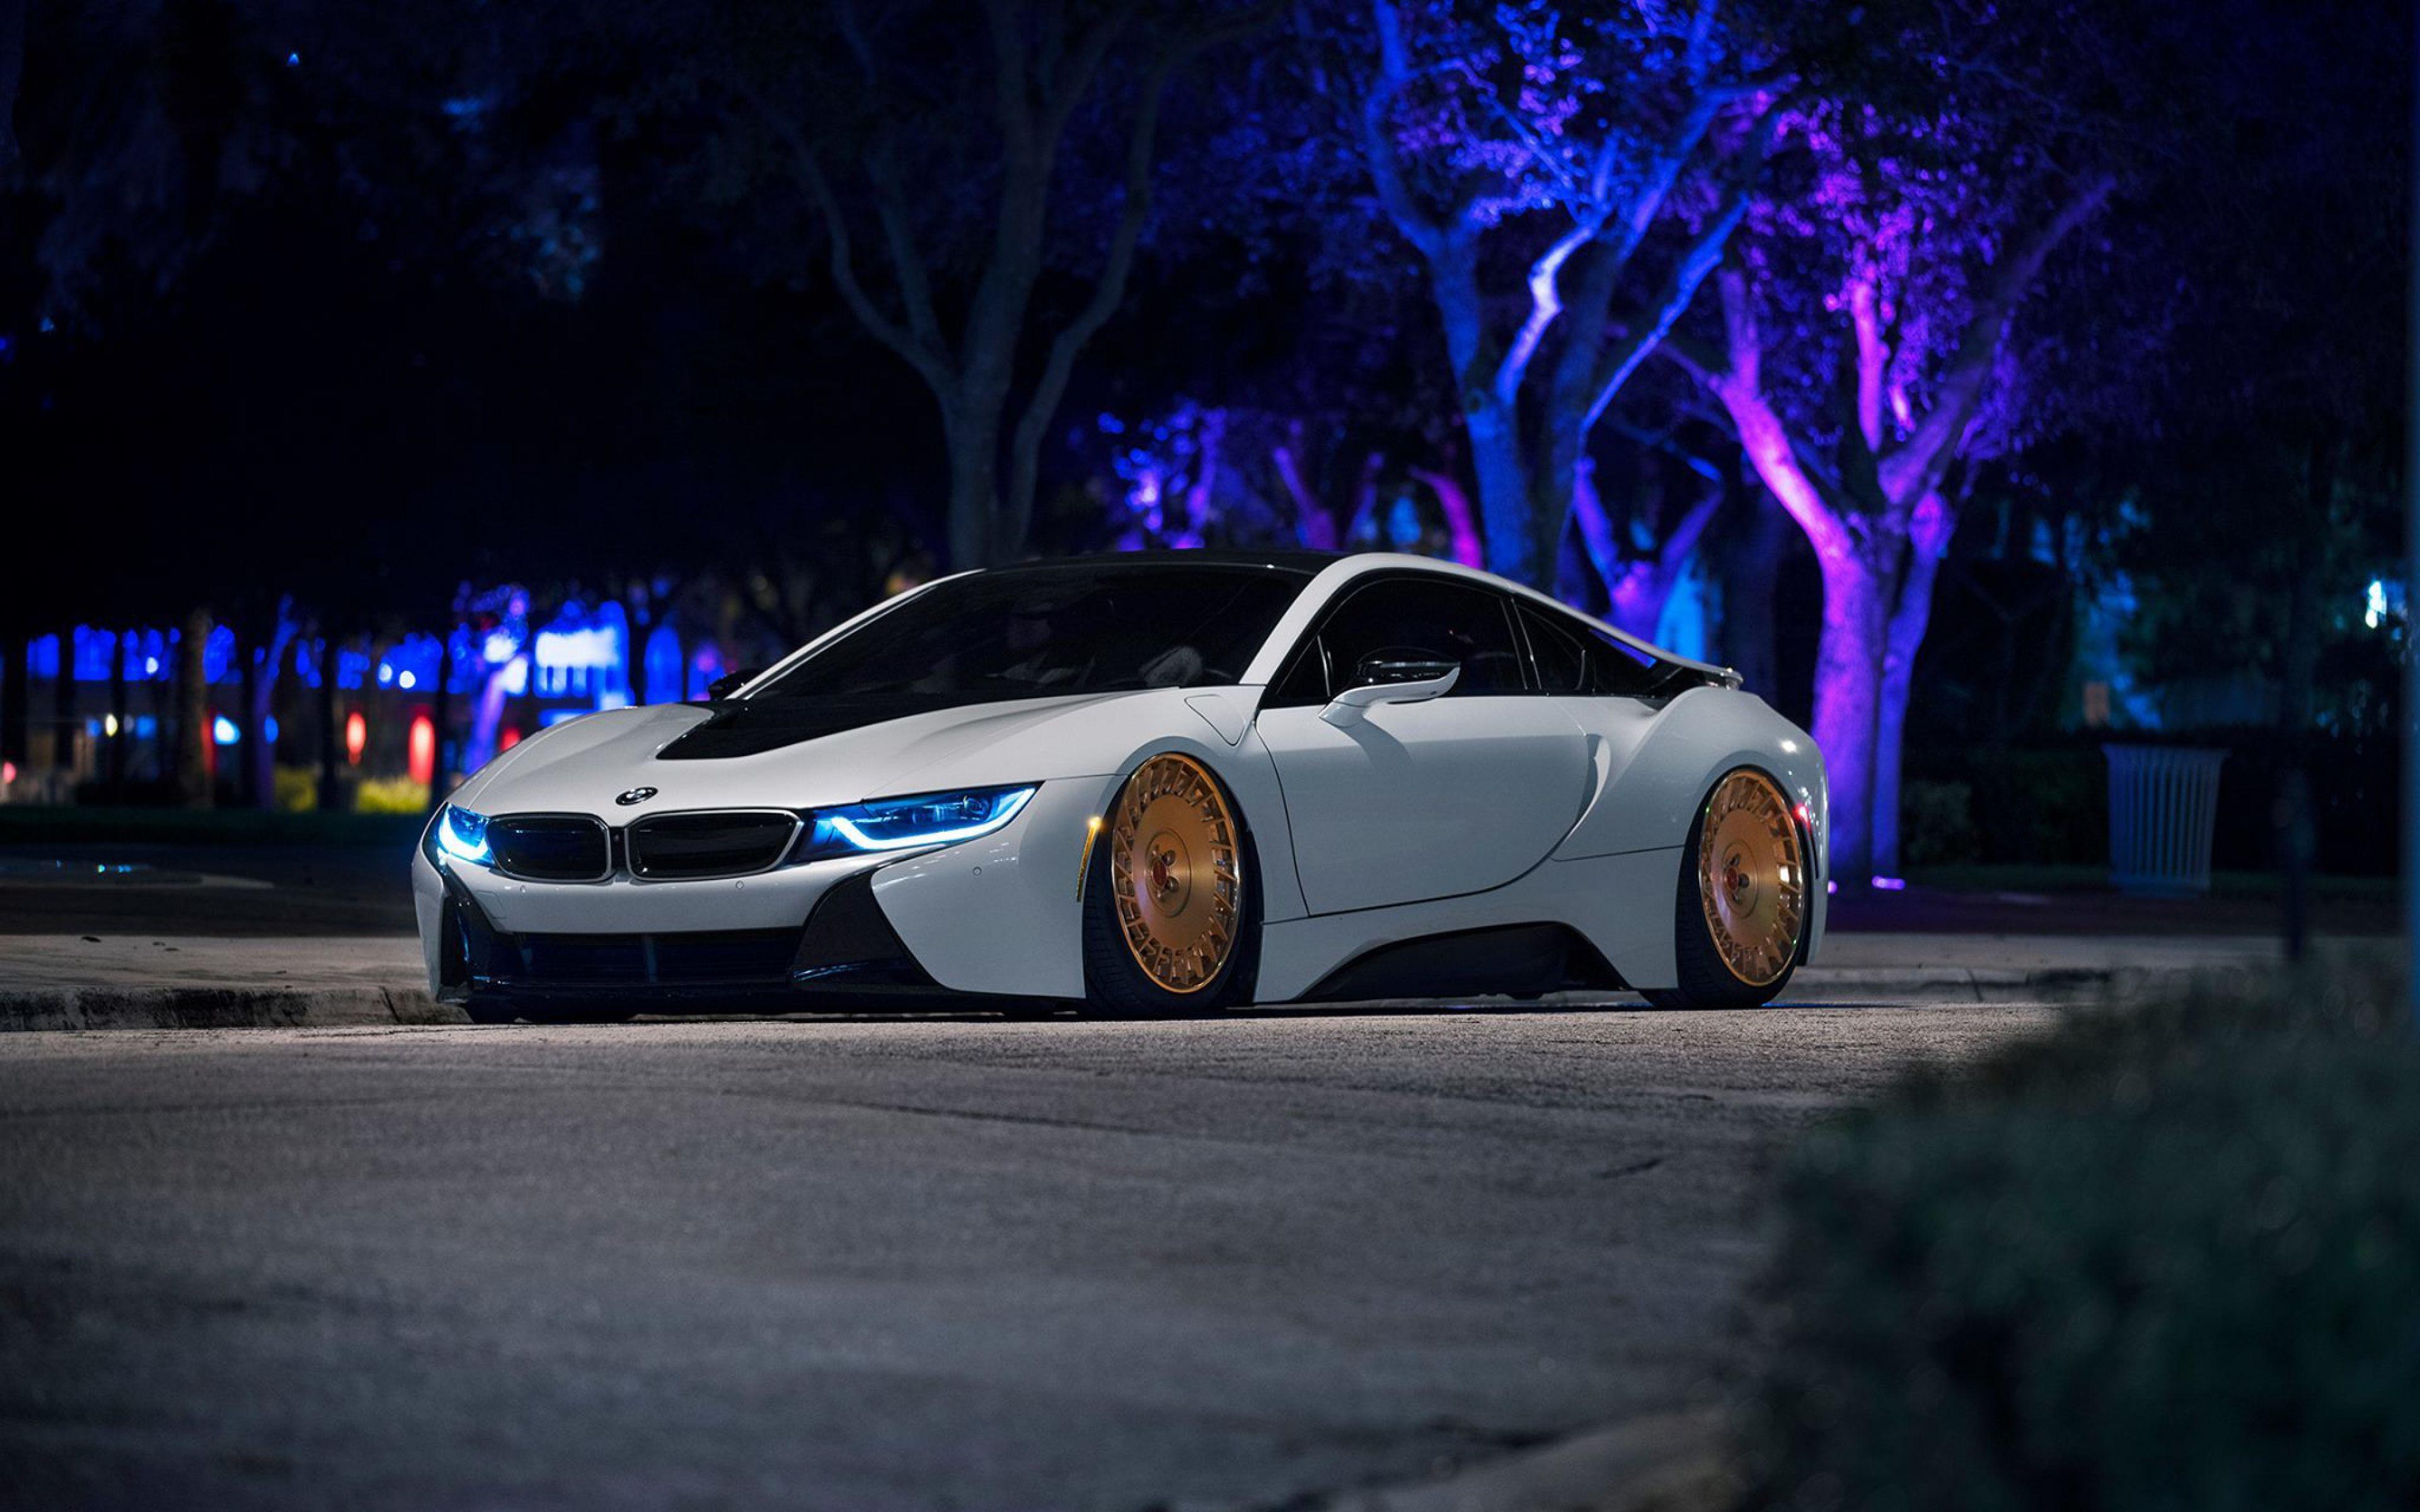 2018 Bmw I8 Coupe Wallpapers Wallpaper Cave